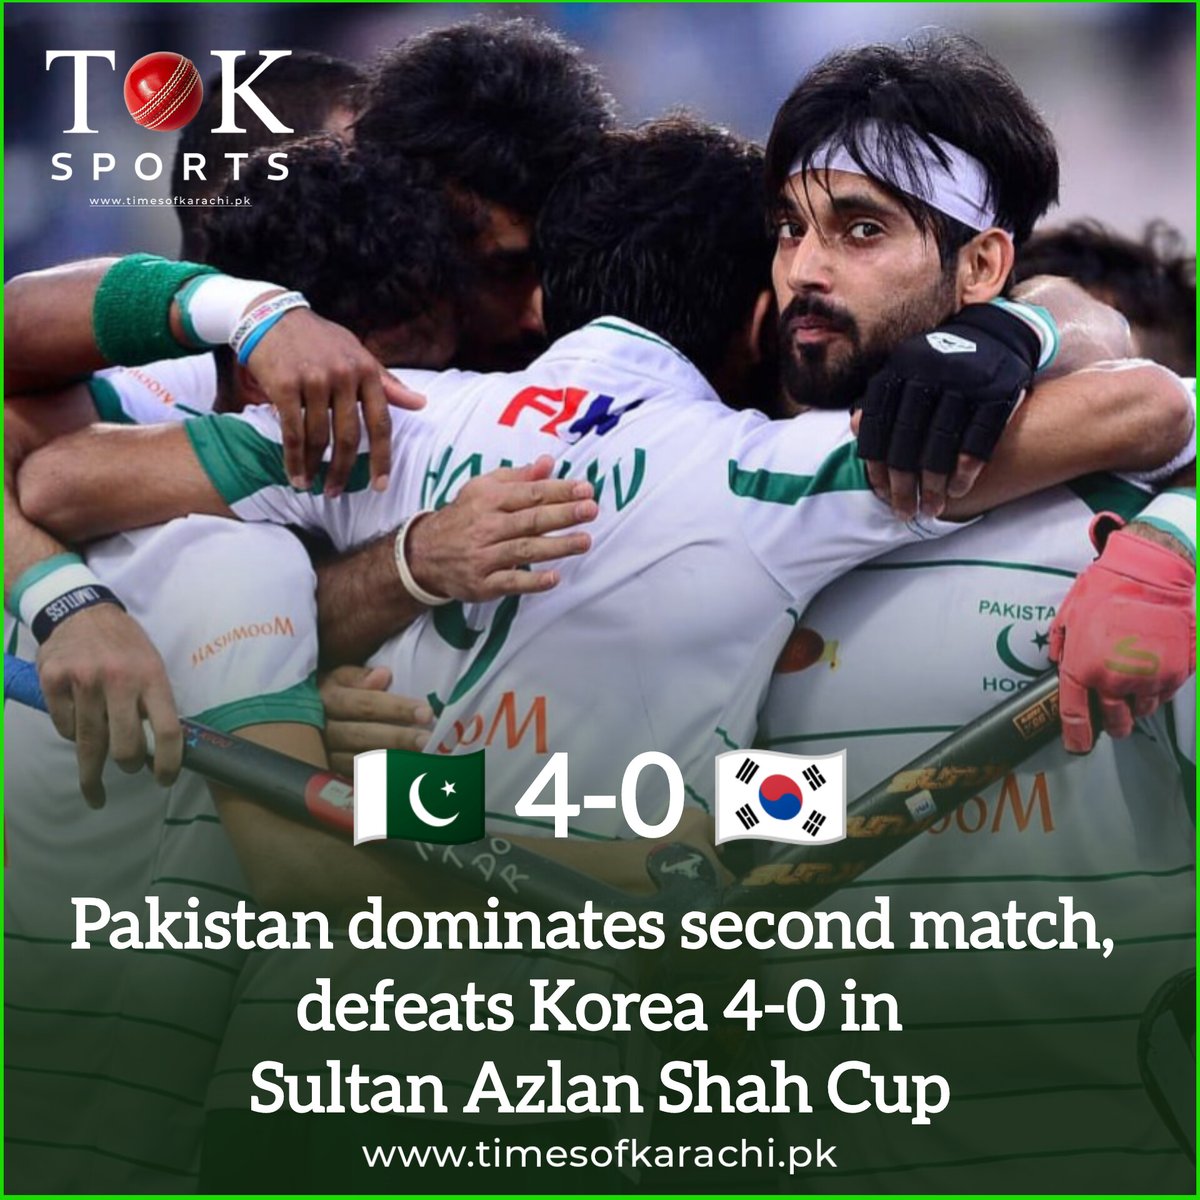 Pakistan won their second match in the Sultan Azlan Shah Cup 2024 against Korea with a score of 4-0. #TOKSports #PakvKor #AzlanShahCup